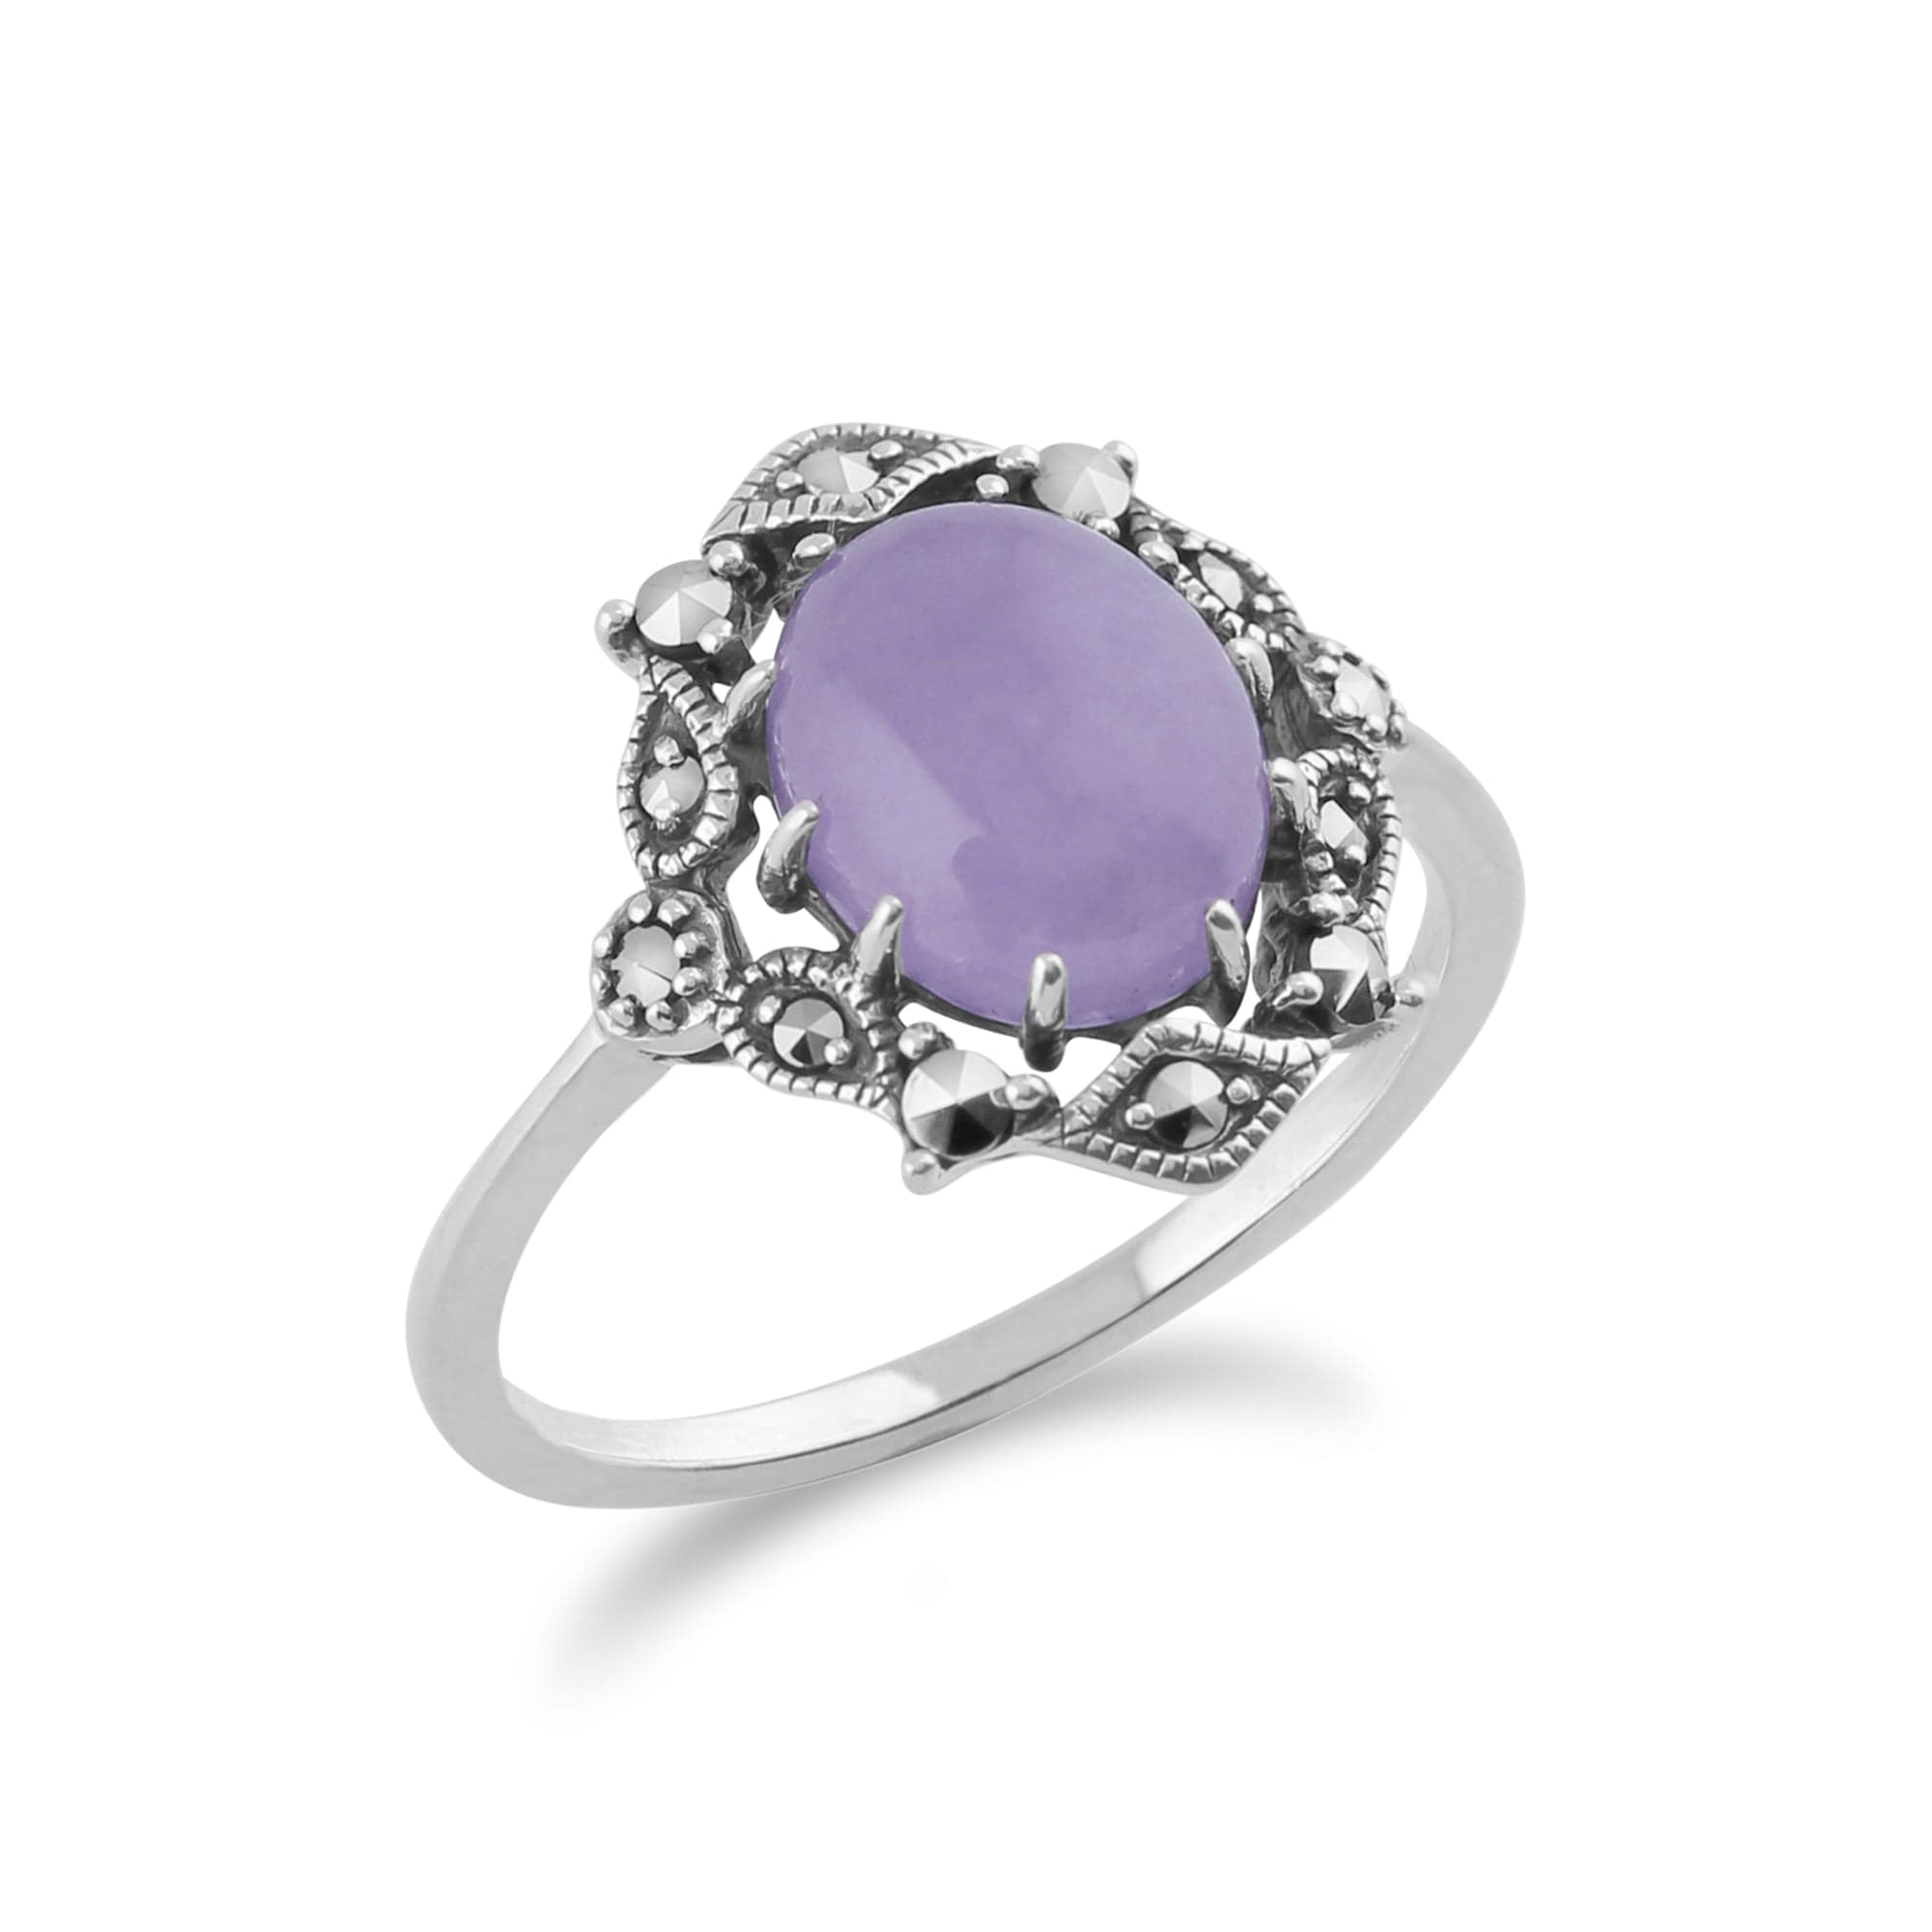 214R480008925 Art Nouveau Style Oval Lavender Jade Cabochon & Marcasite Statement Ring in 925 Sterling Silver 2